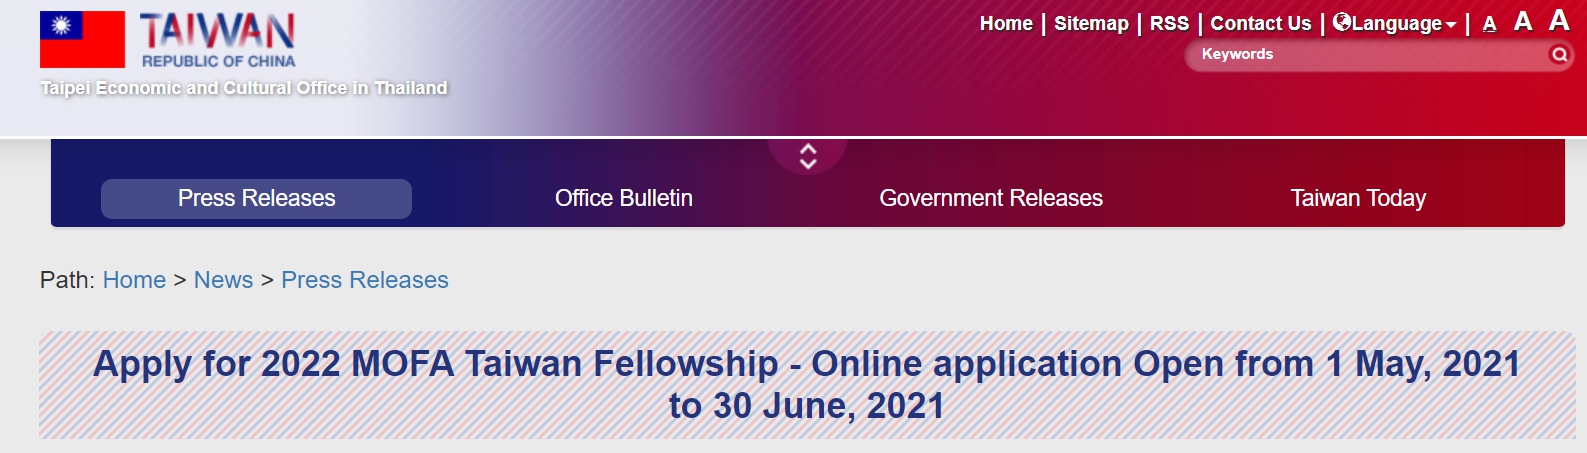 【2021.5.13】Apply for 2022 MOFA Taiwan Fellowship – Online application Open from 1 May, 2021 to 30 June, 2021